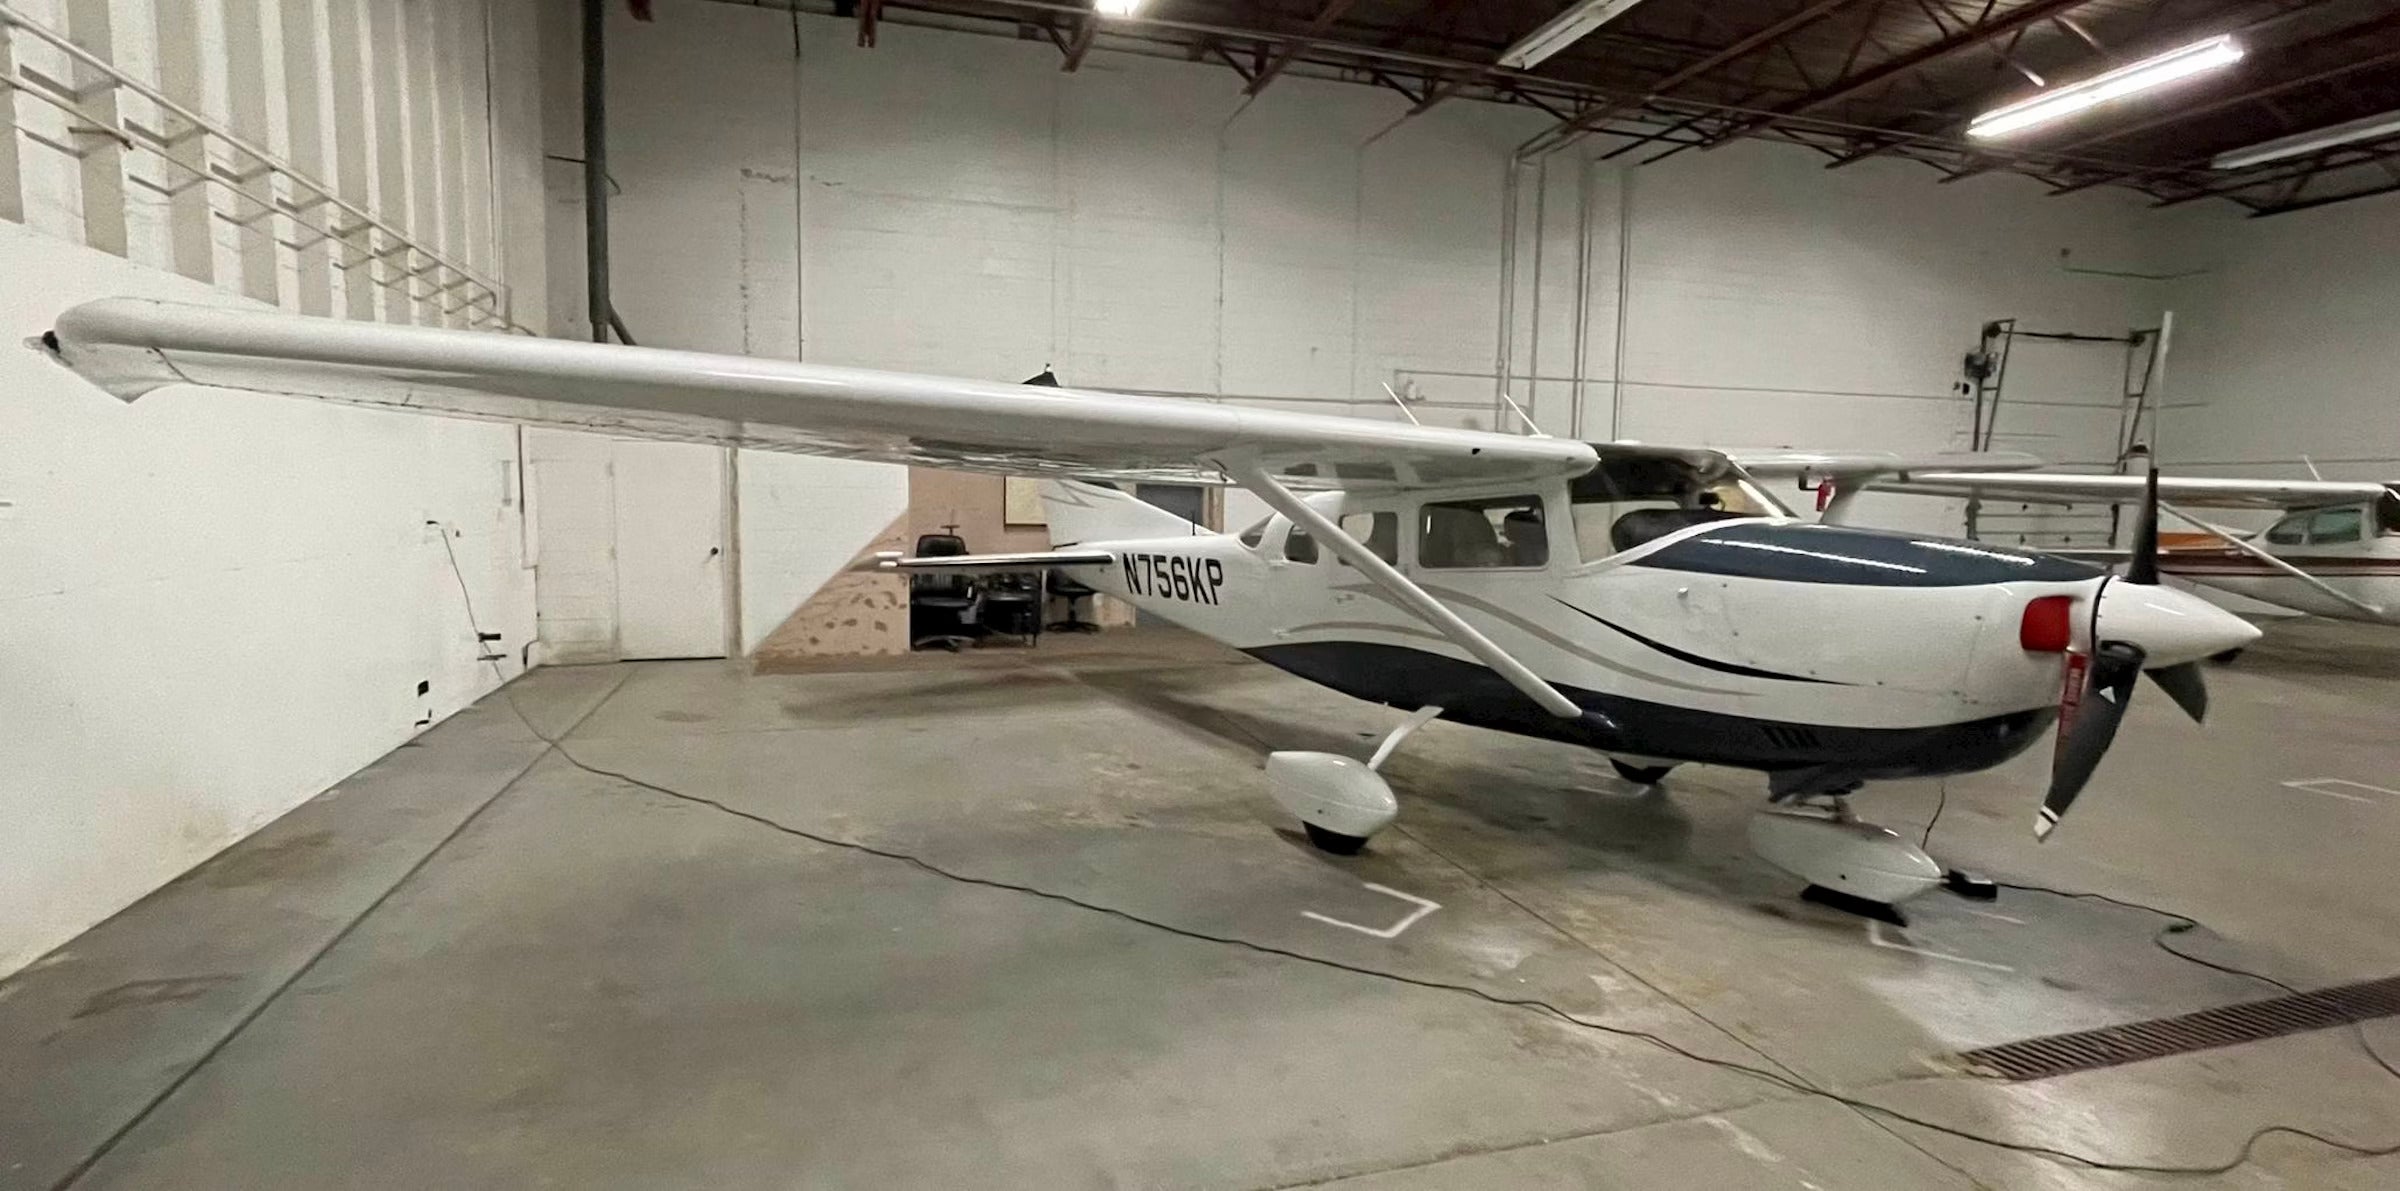 This 1978 Cessna U206G Is a Heavy-Hauling ‘AircraftForSale’ Top Pick